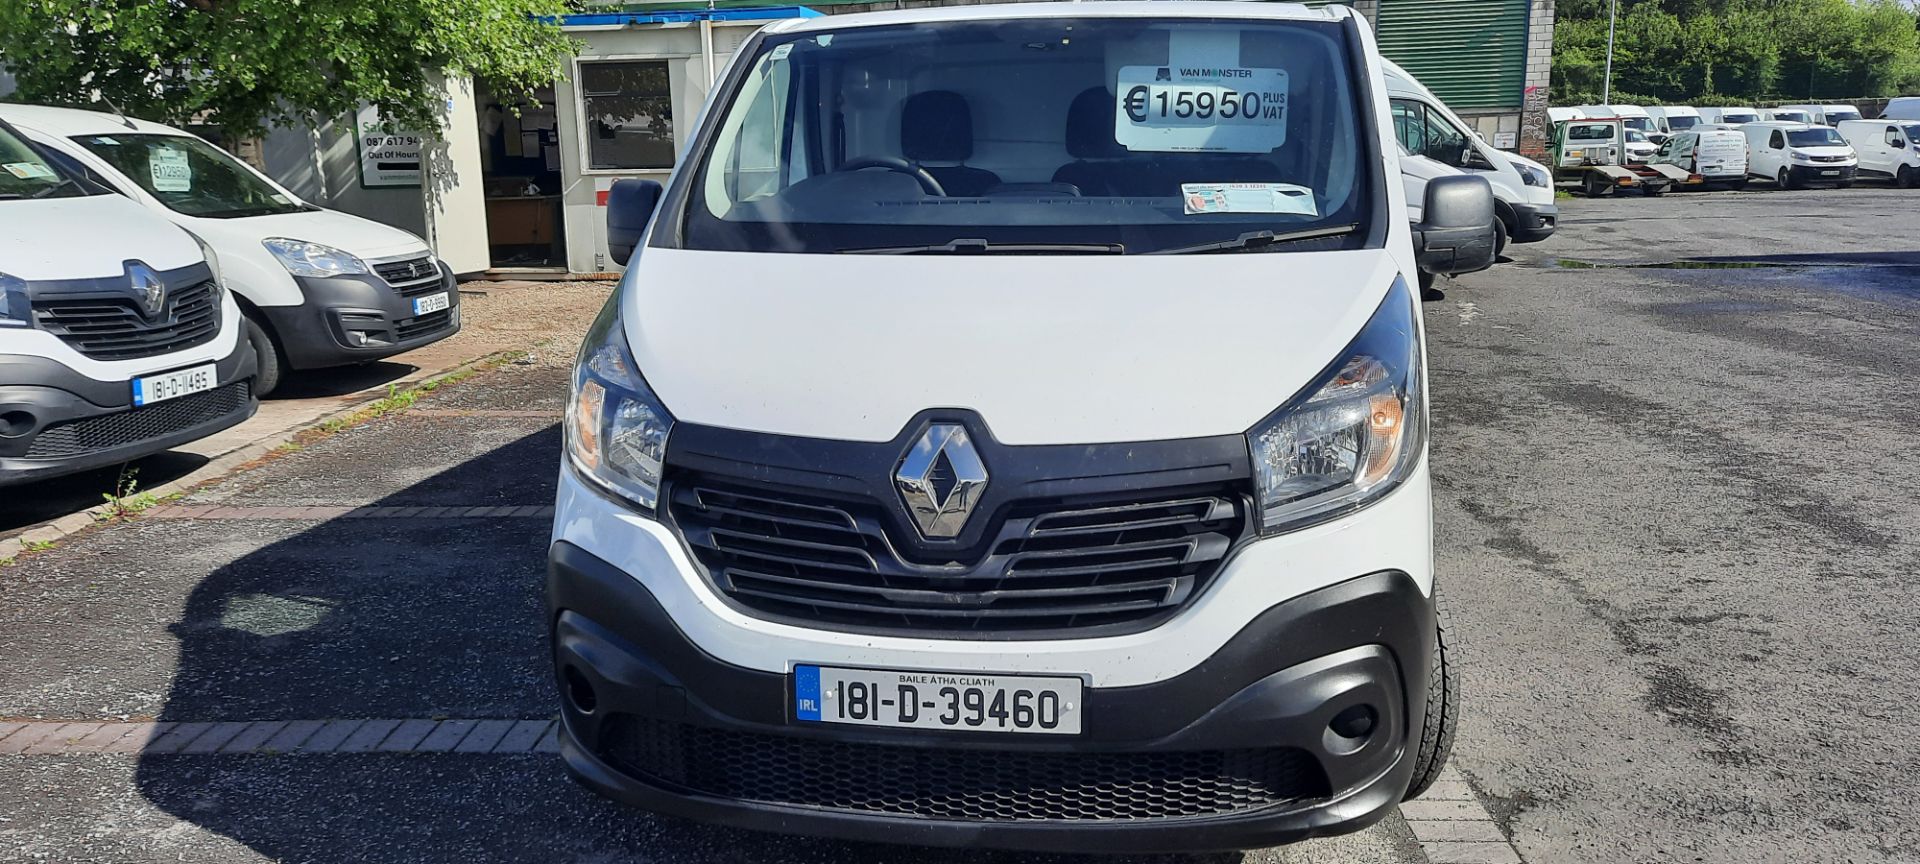 2018 Renault Trafic LL29 DCI 120 Business 3DR (181D39460) Thumbnail 7